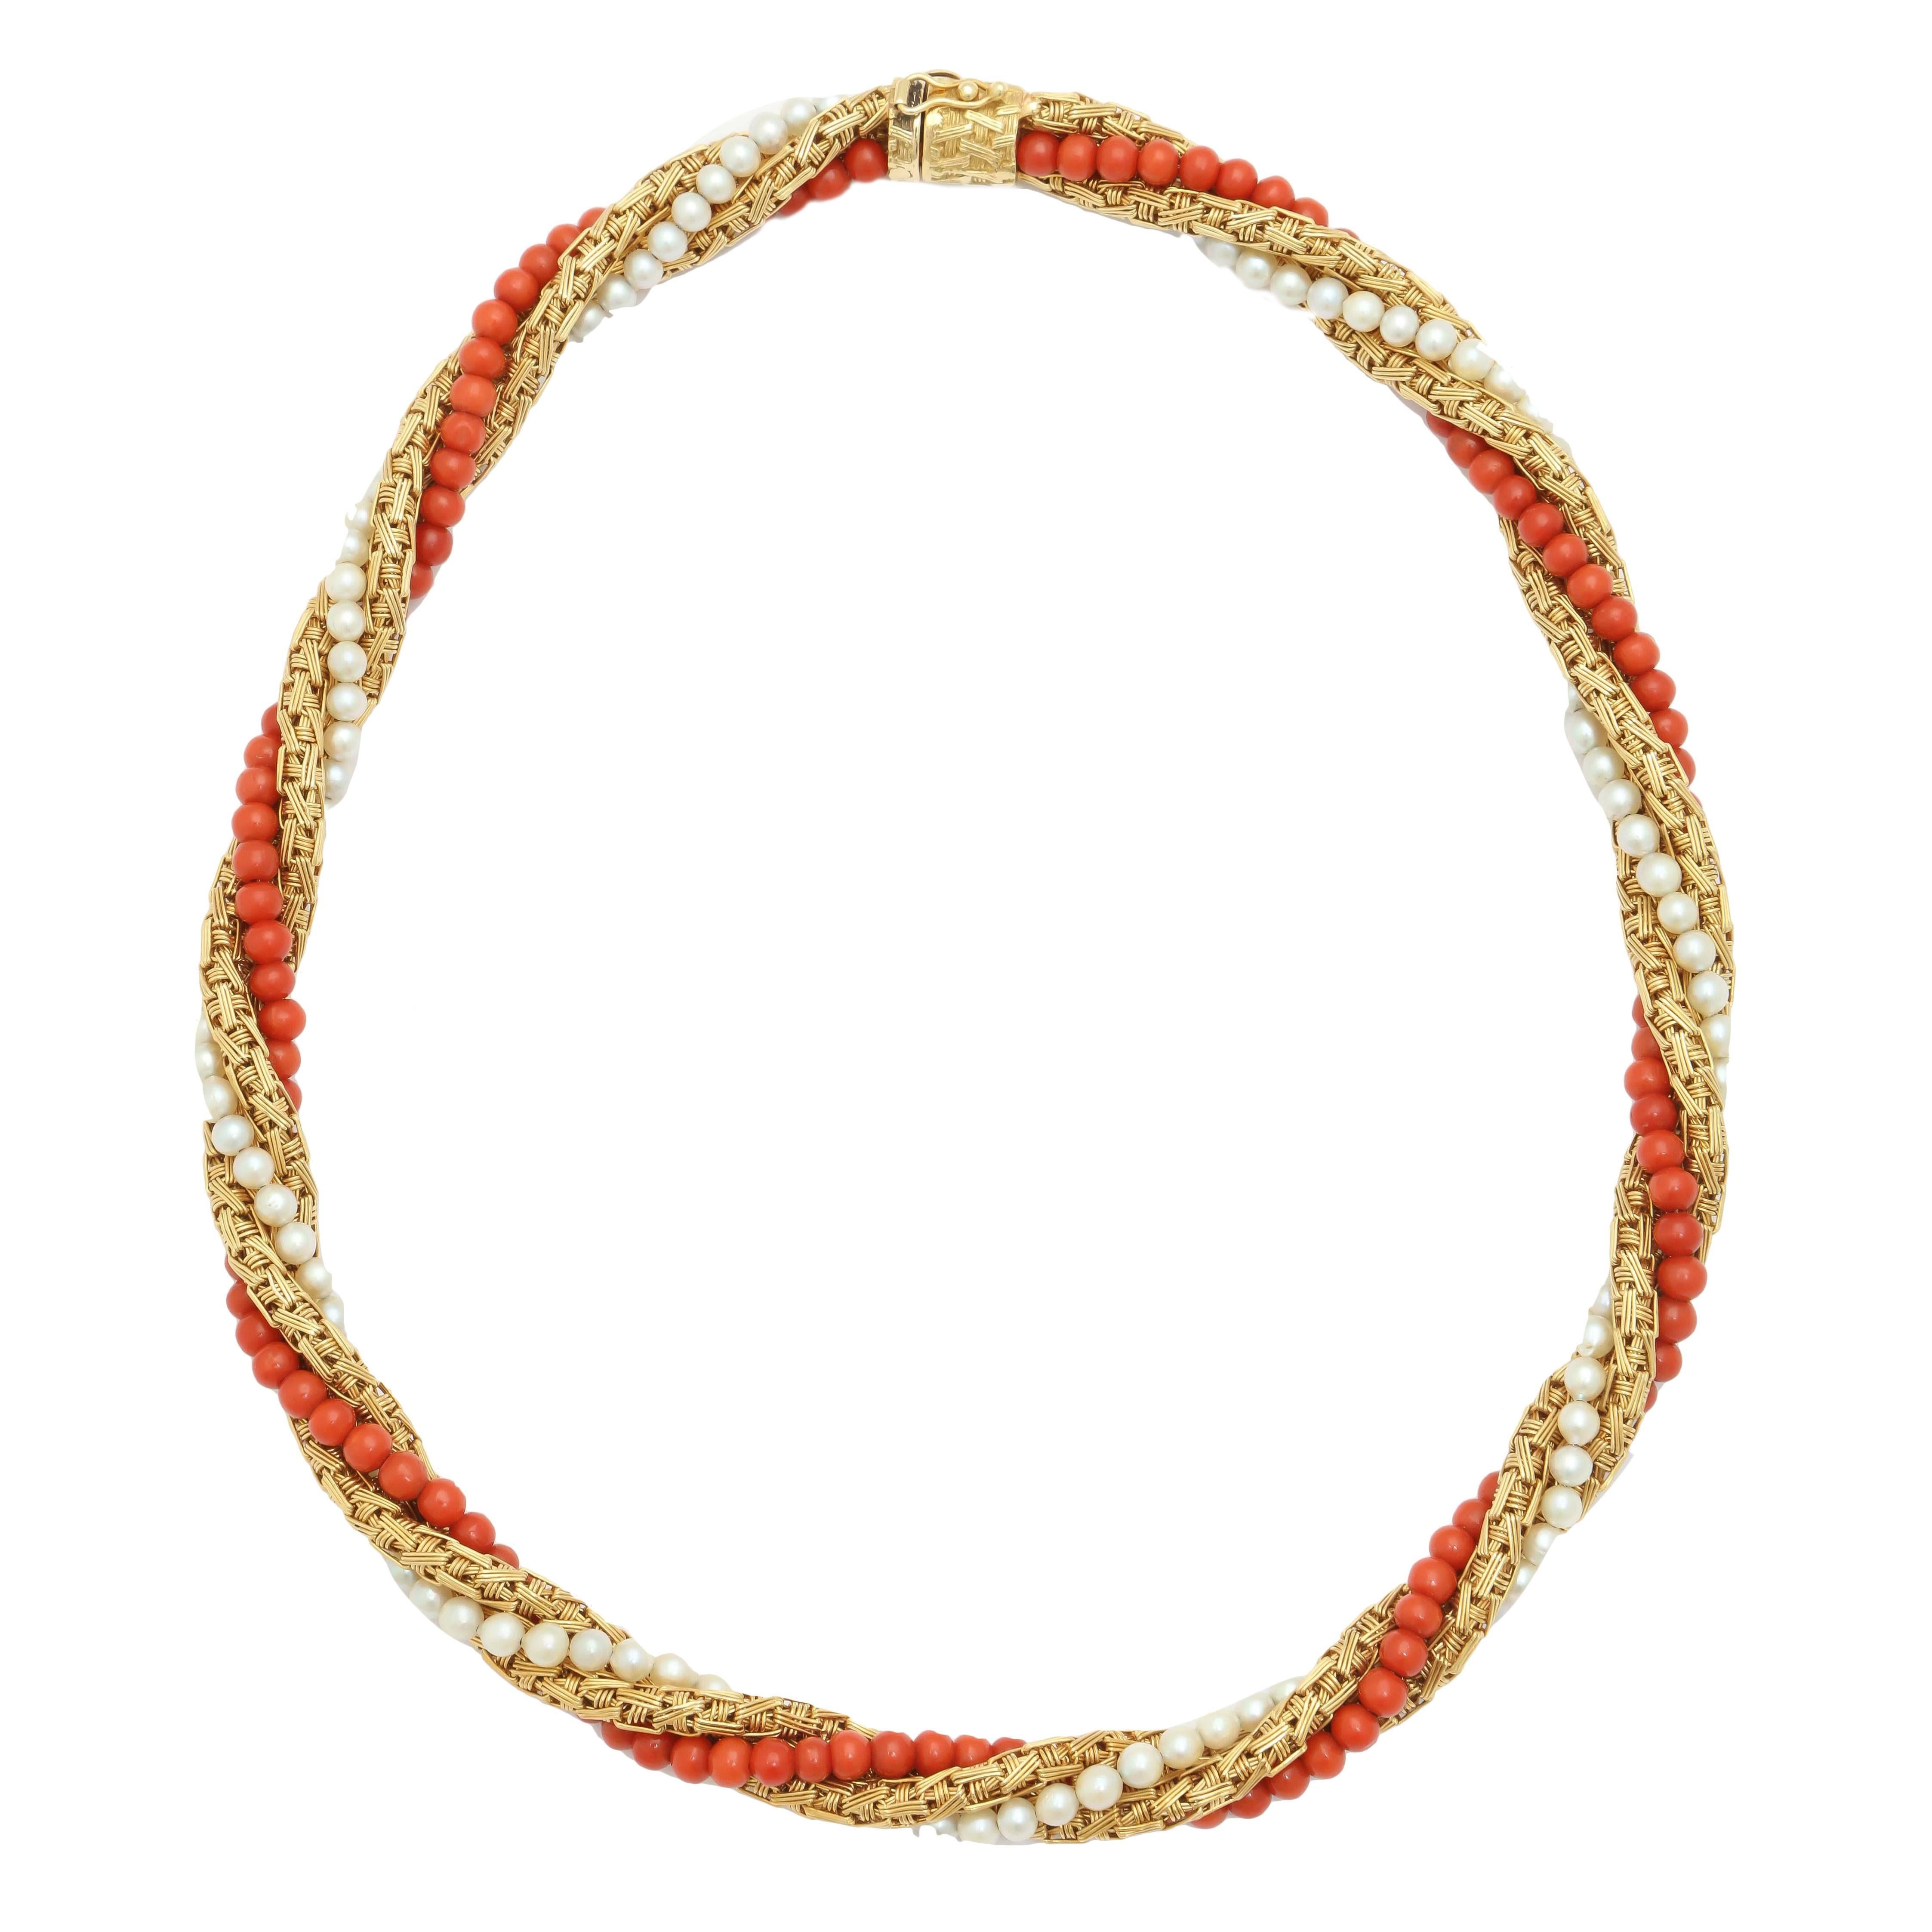 1960s Coral Pearl Gold Intertwined Twisted Chic Neckace